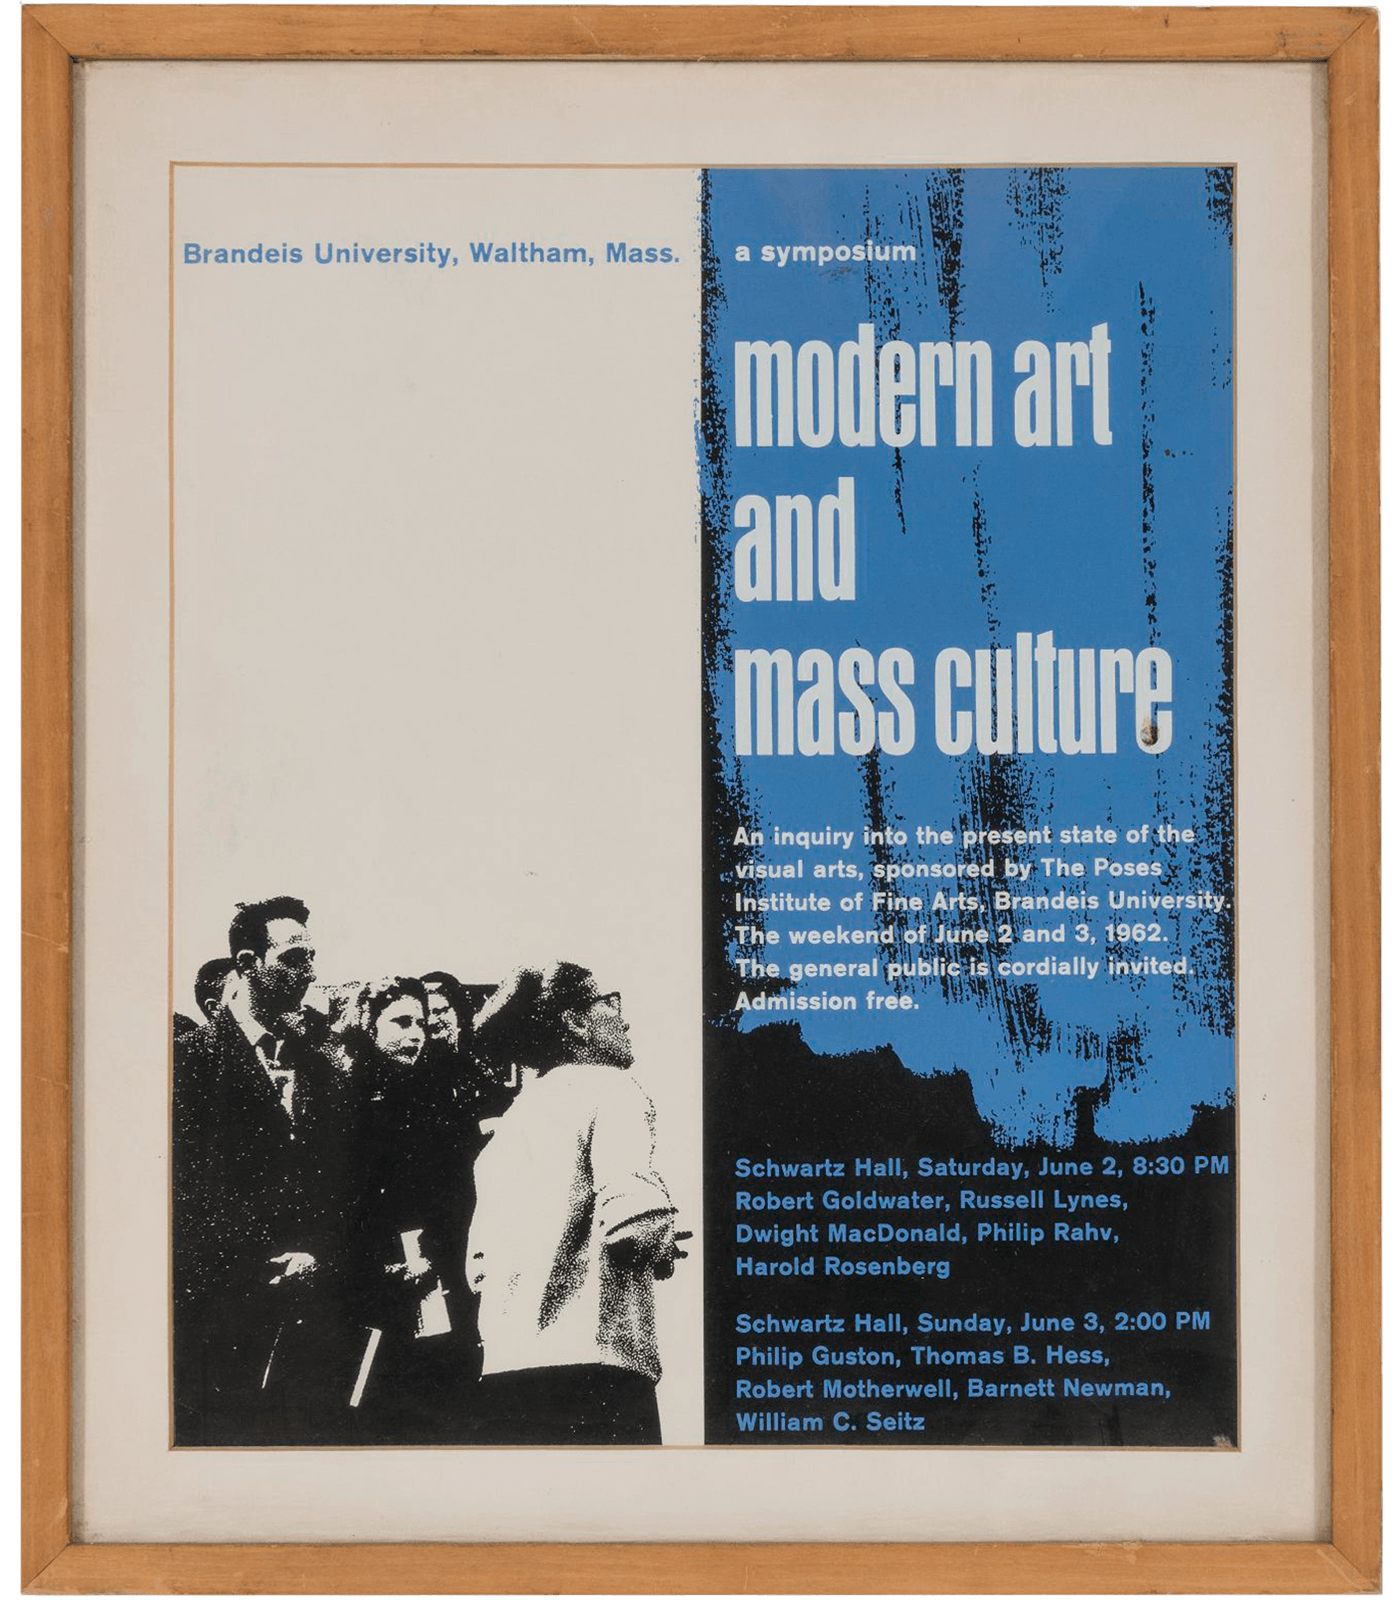 Flyer for the symposium Modern Art and Mass Culture, 1962. Features images in black, white, and blue.